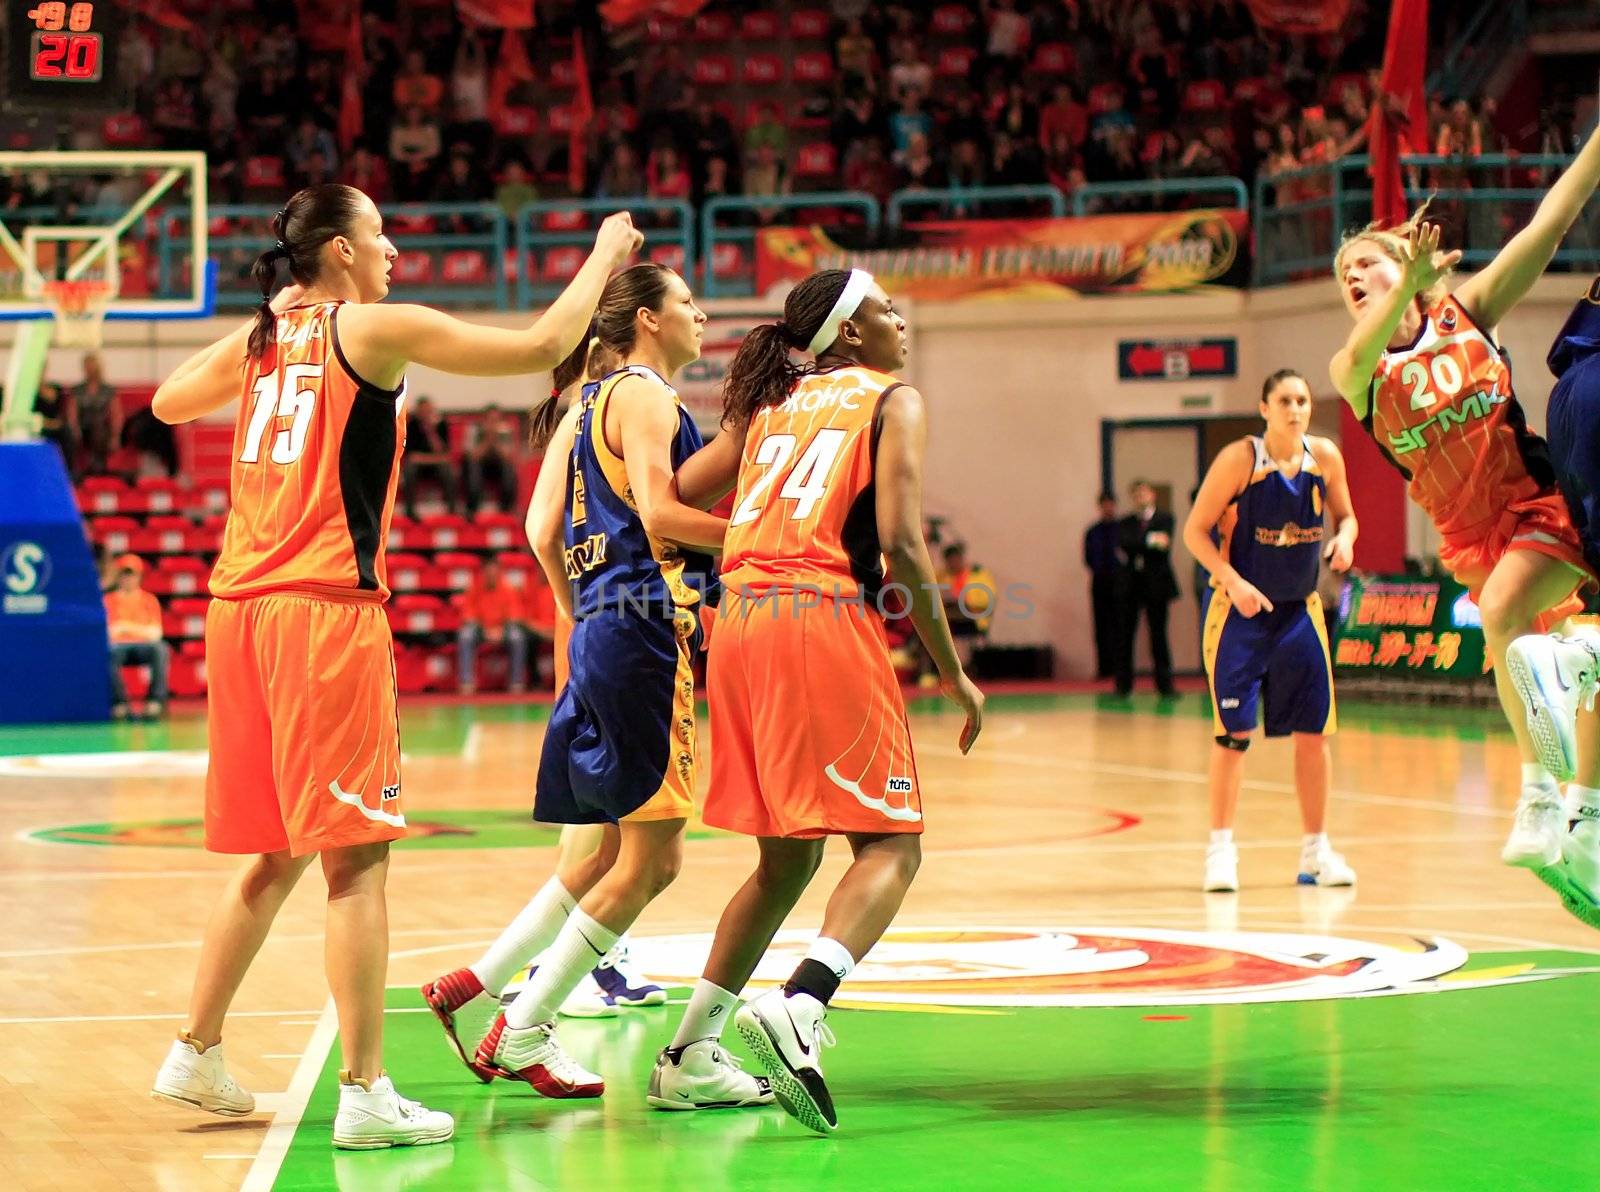 Female Basketball. Attack and Protection by Ledoct